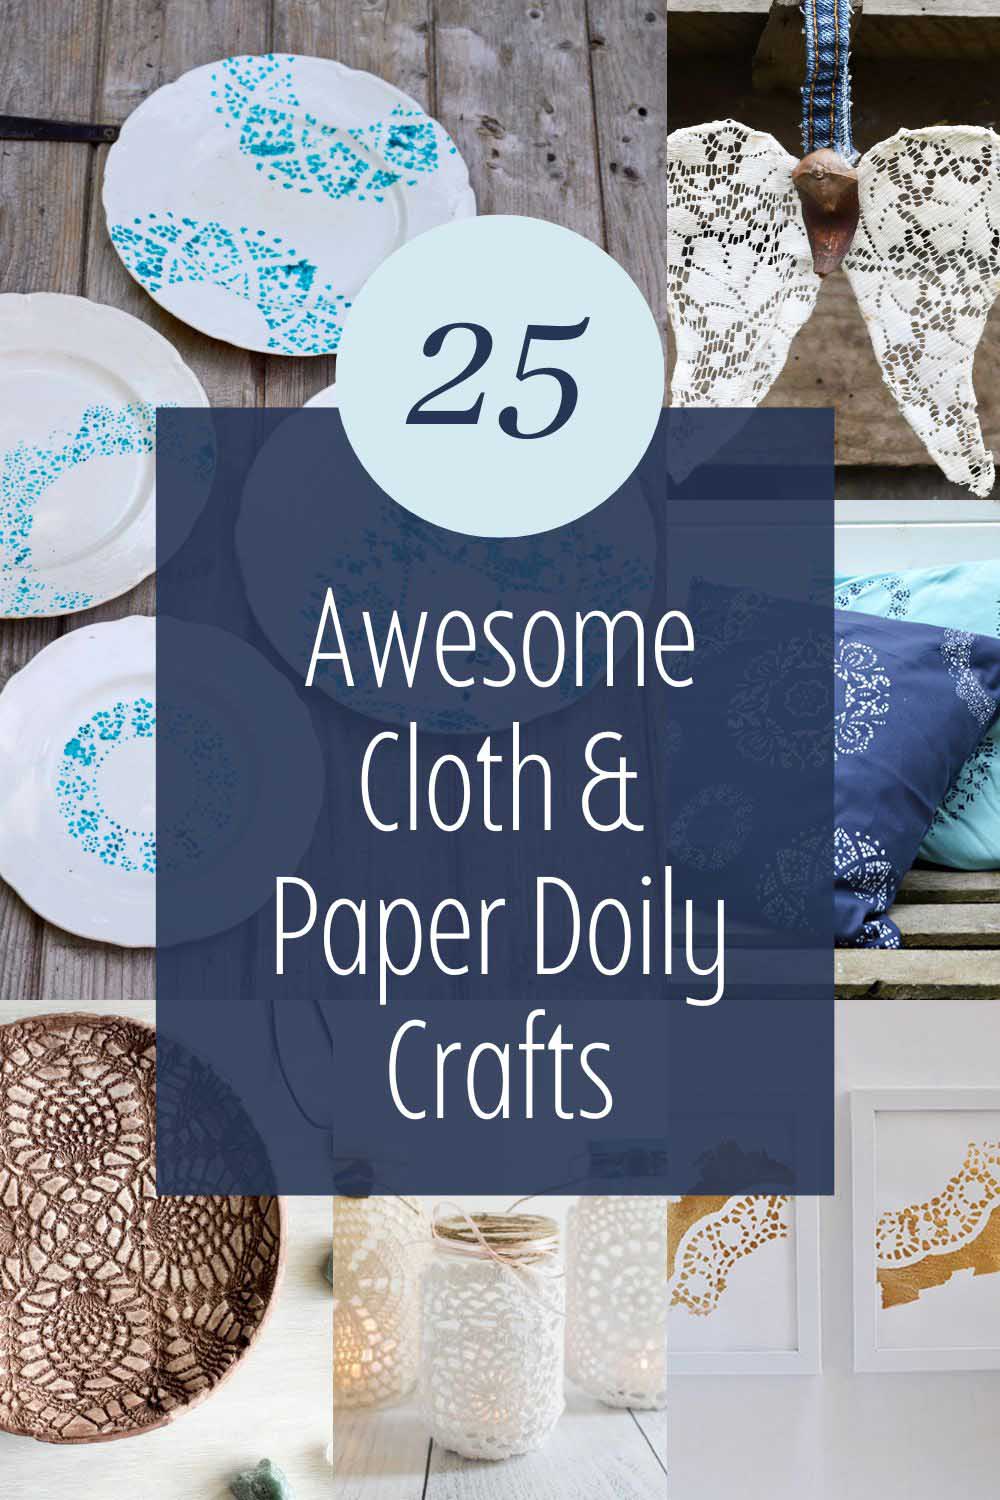 26 Easy Cloth and Paper Doily Crafts I Can't Wait To Try - Pillar